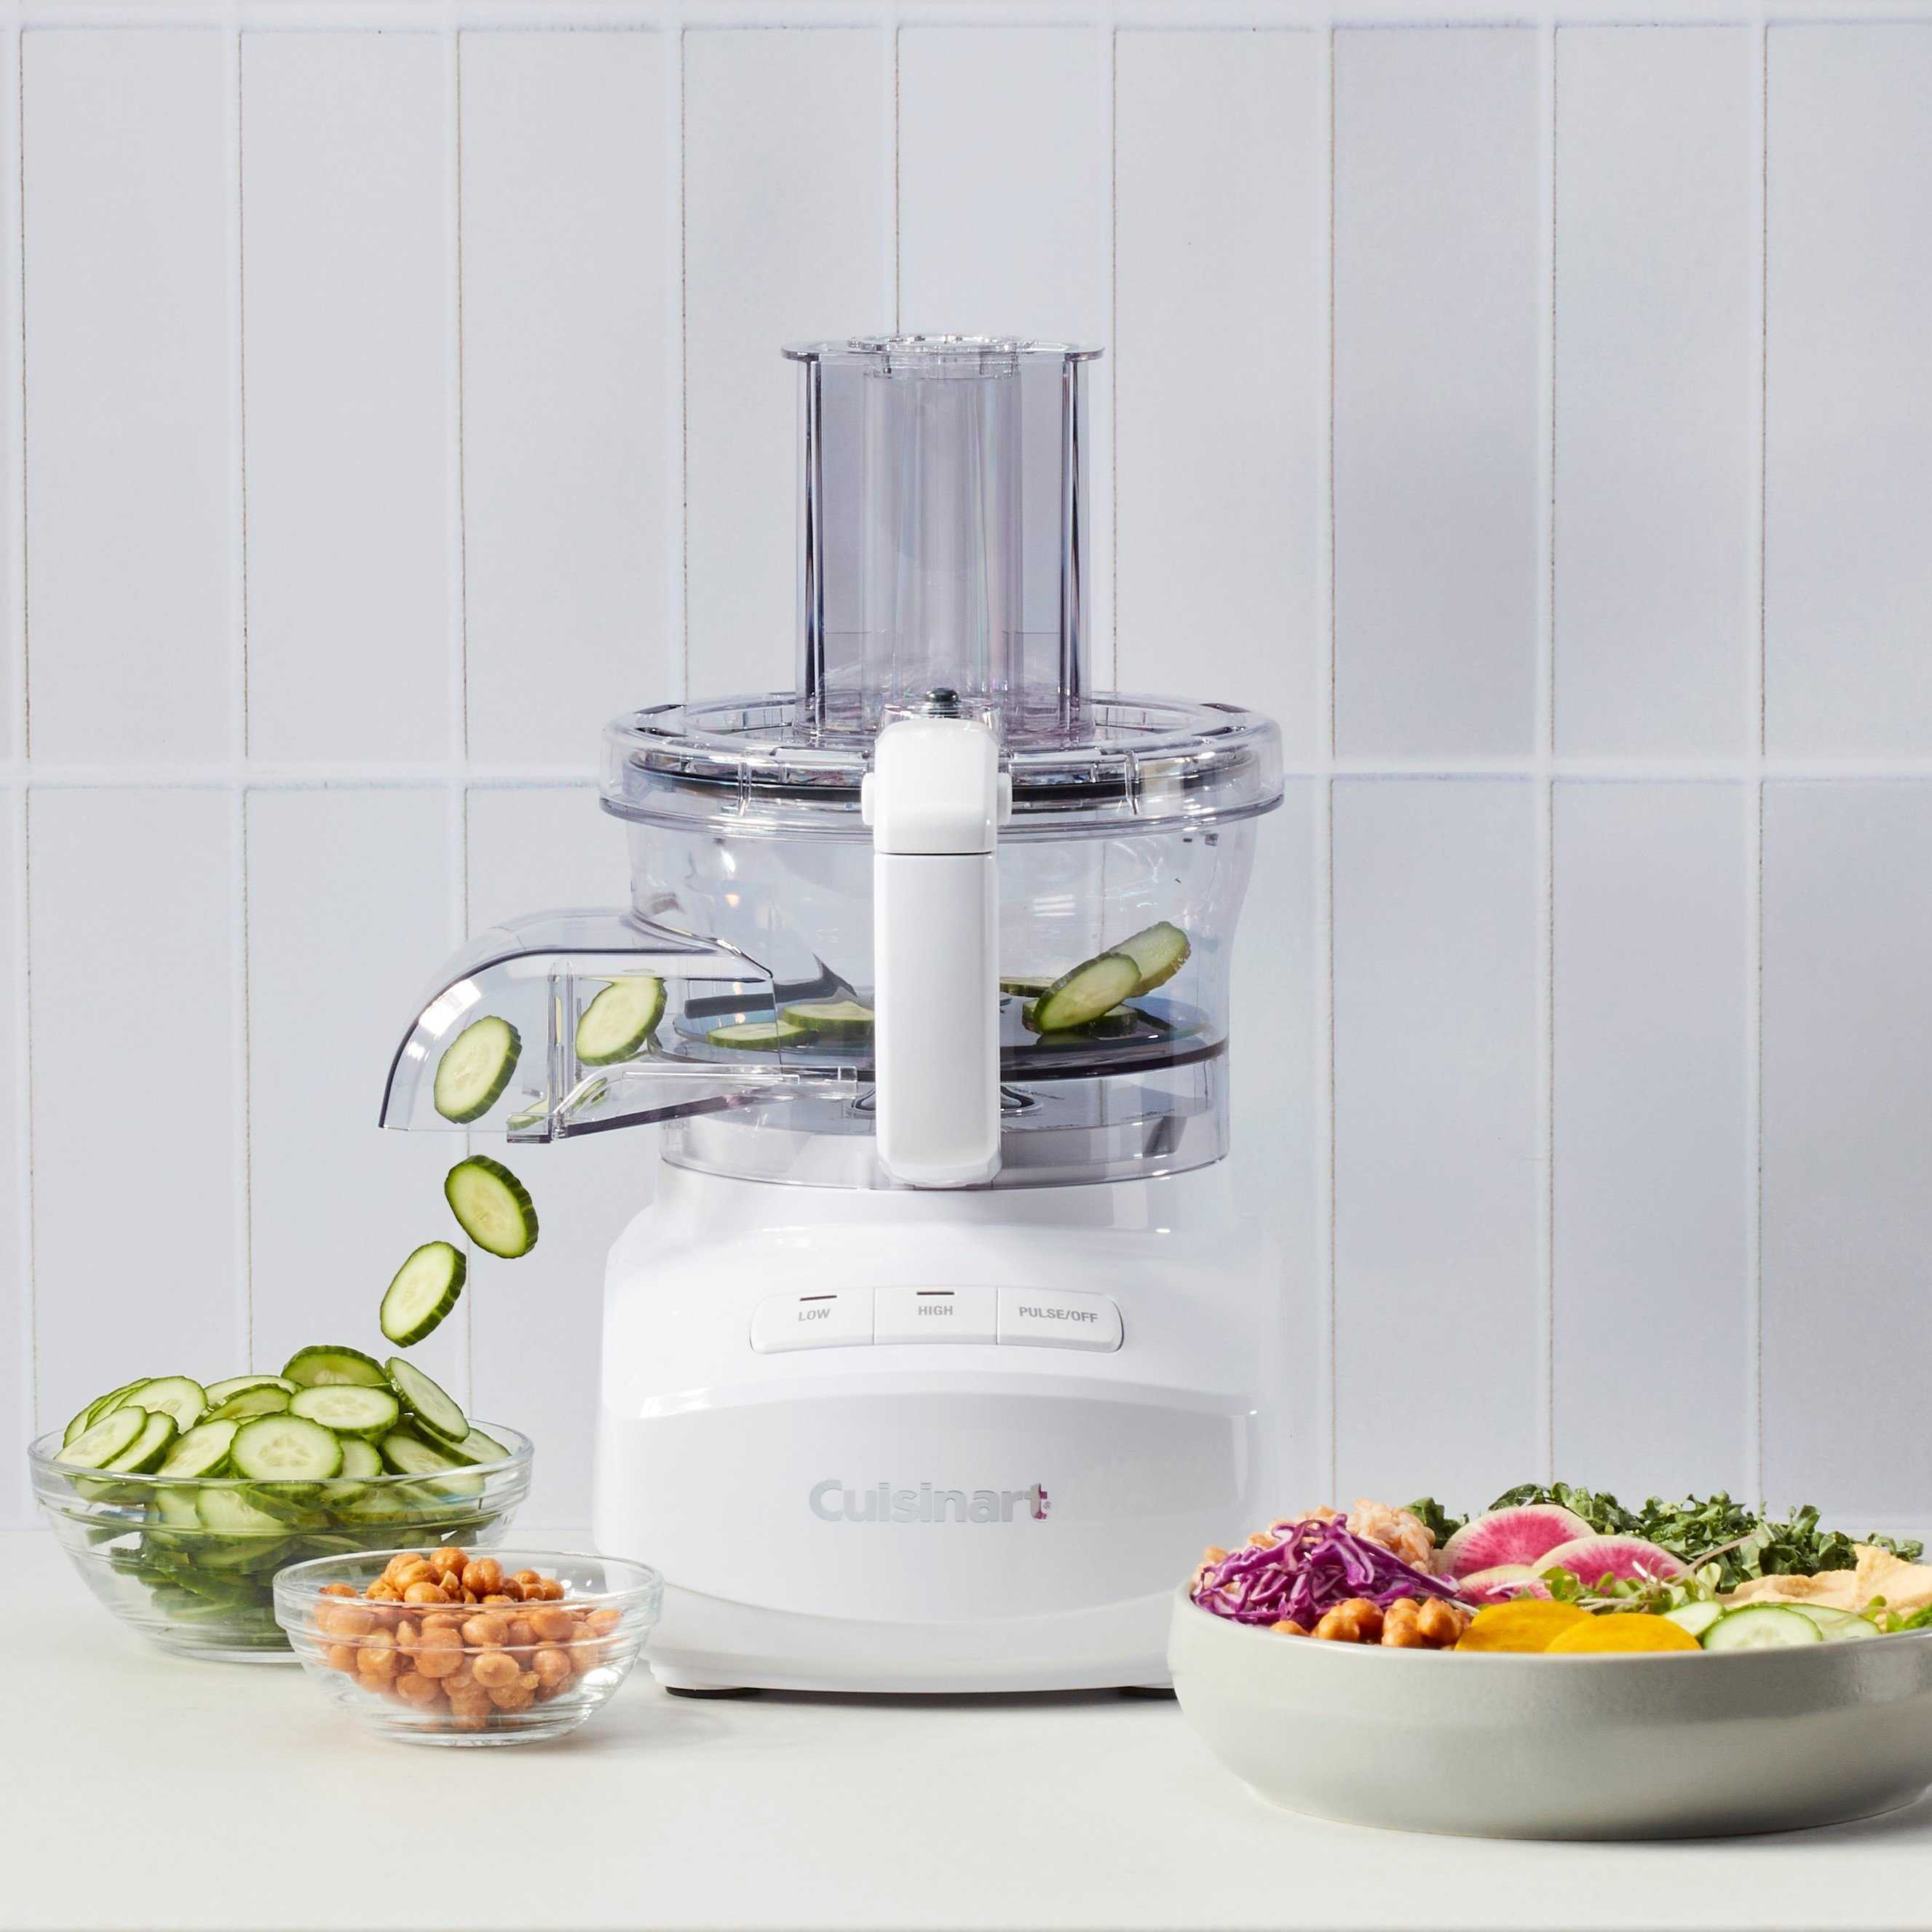 Cuisinart 9-Cup Continuous Feed Food Processor